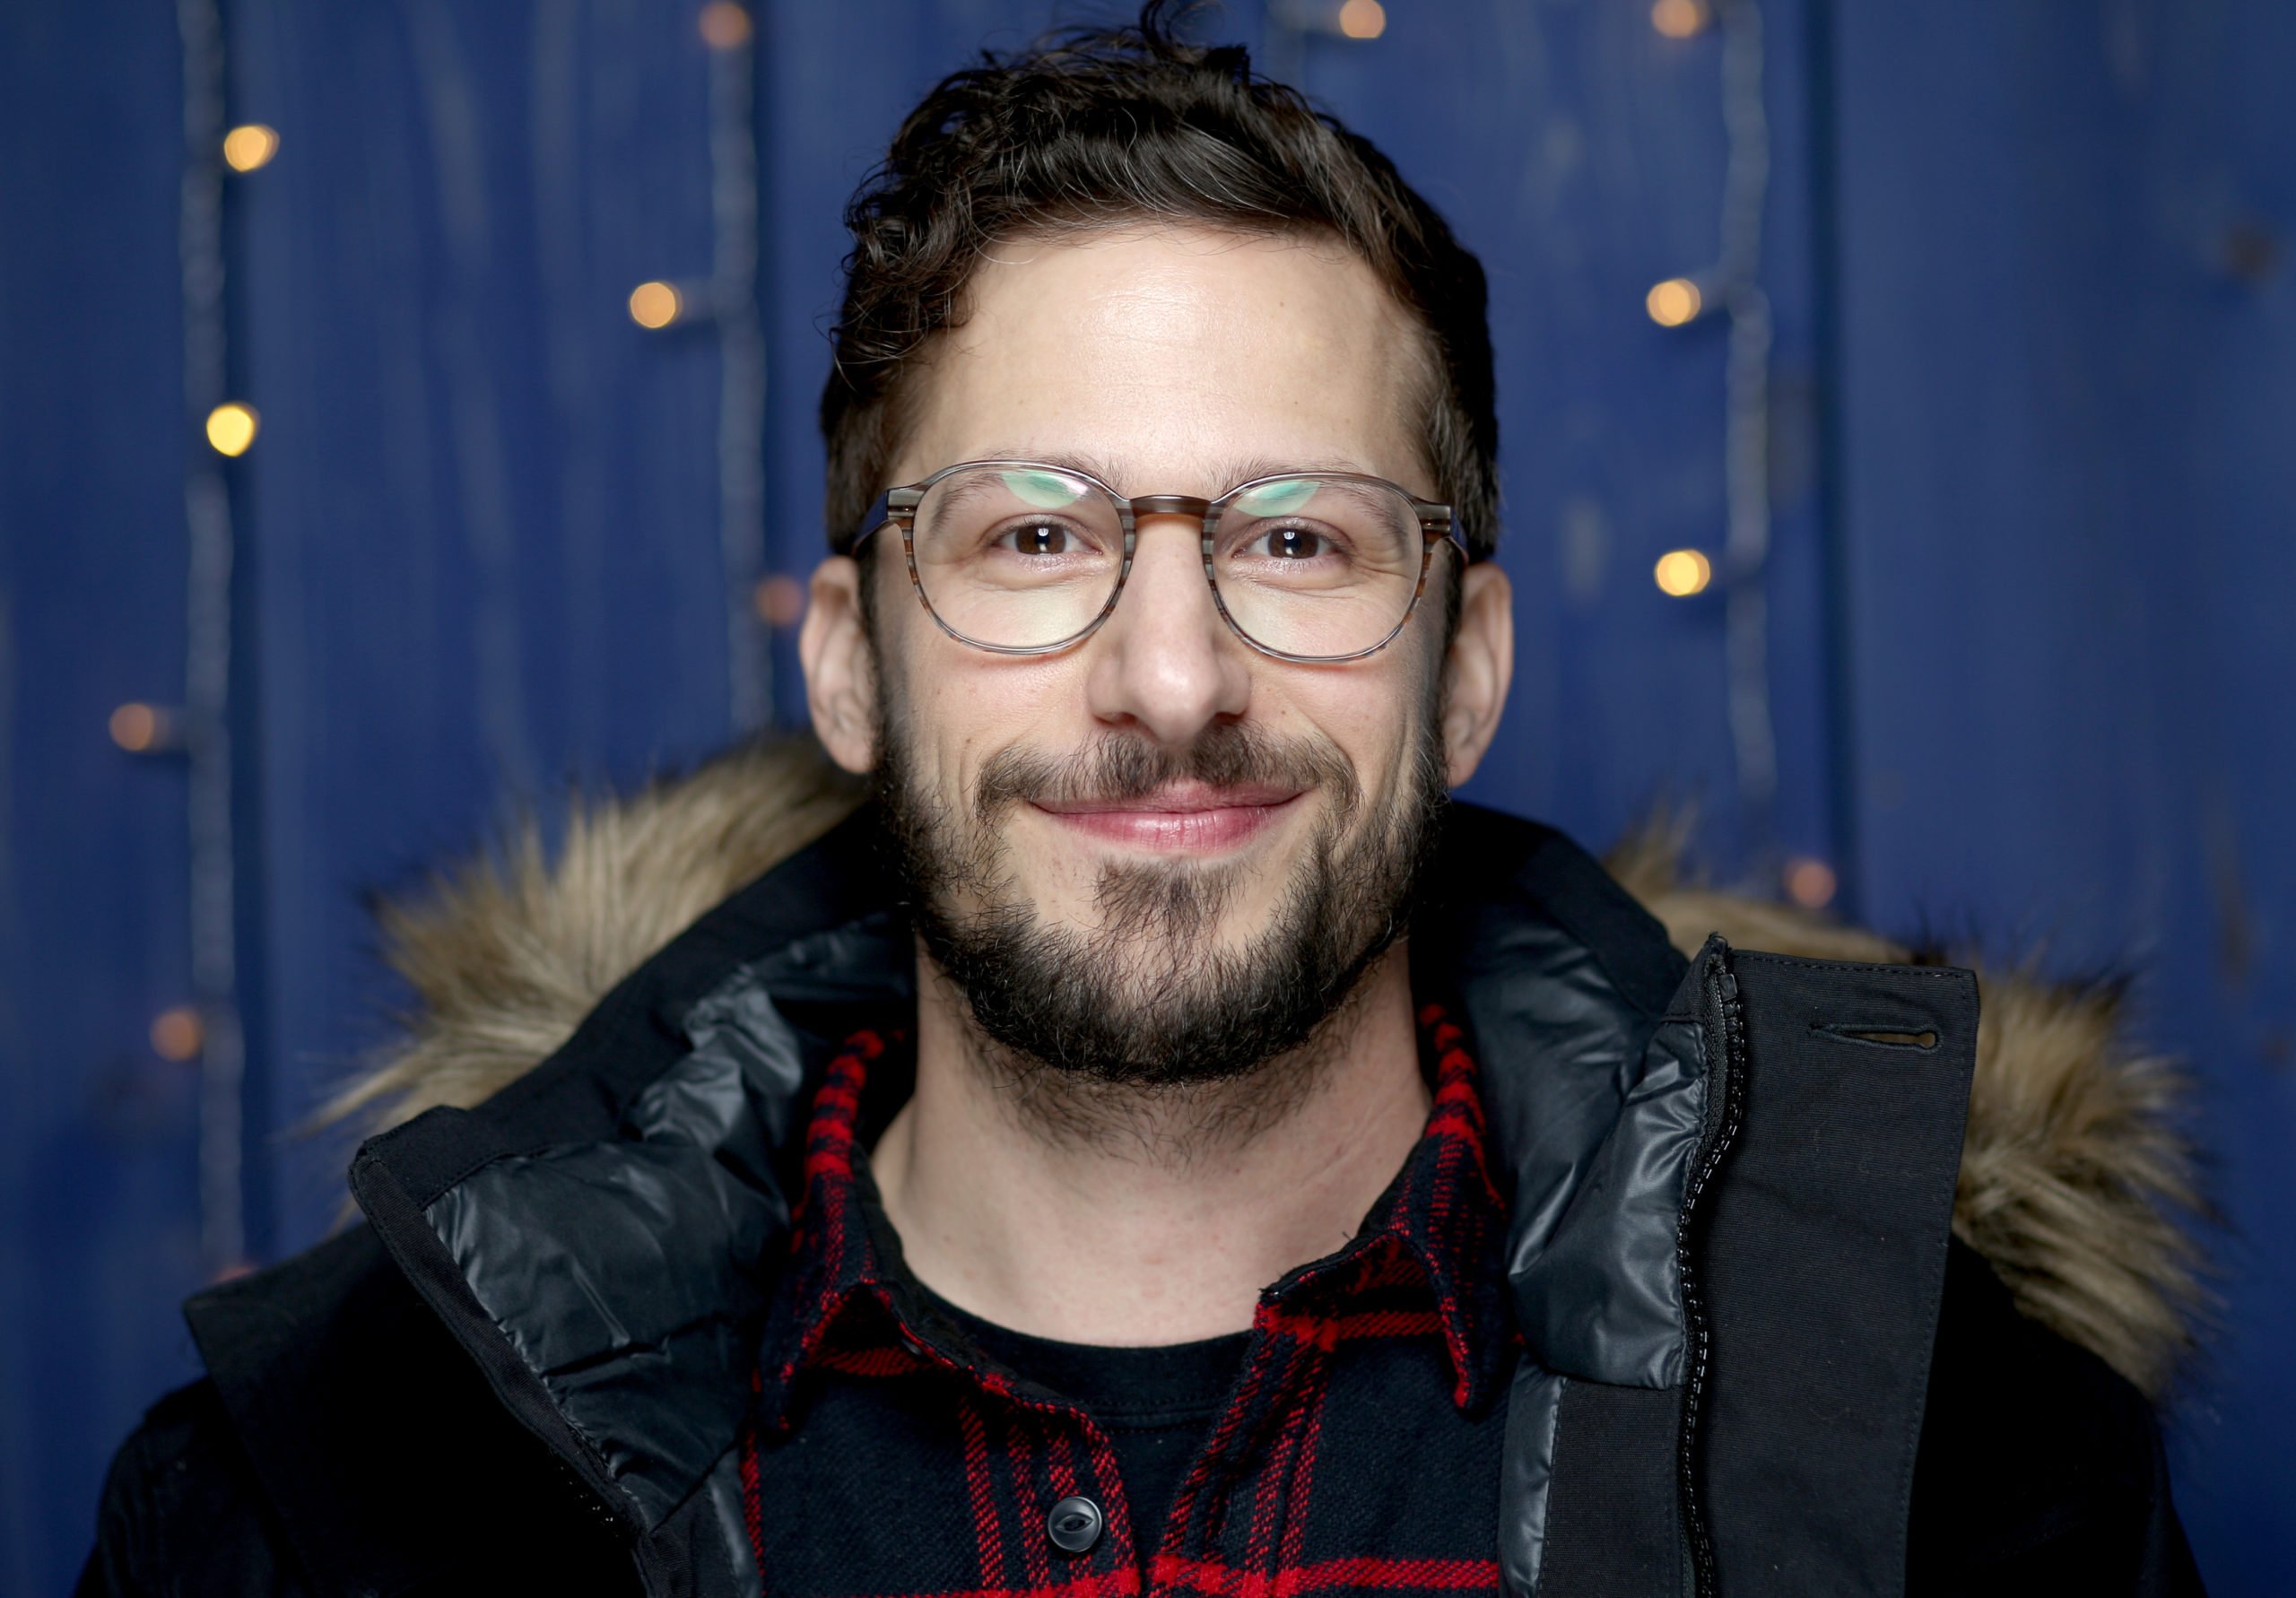 PARK CITY, UTAH - JANUARY 25: Andy Samberg of 'Palm Springs' attends the IMDb Studio at Acura Festival Village on location at the 2020 Sundance Film Festival – Day 2 on January 25, 2020 in Park City, Utah. (Photo by Rich Polk/Getty Images for IMDb)